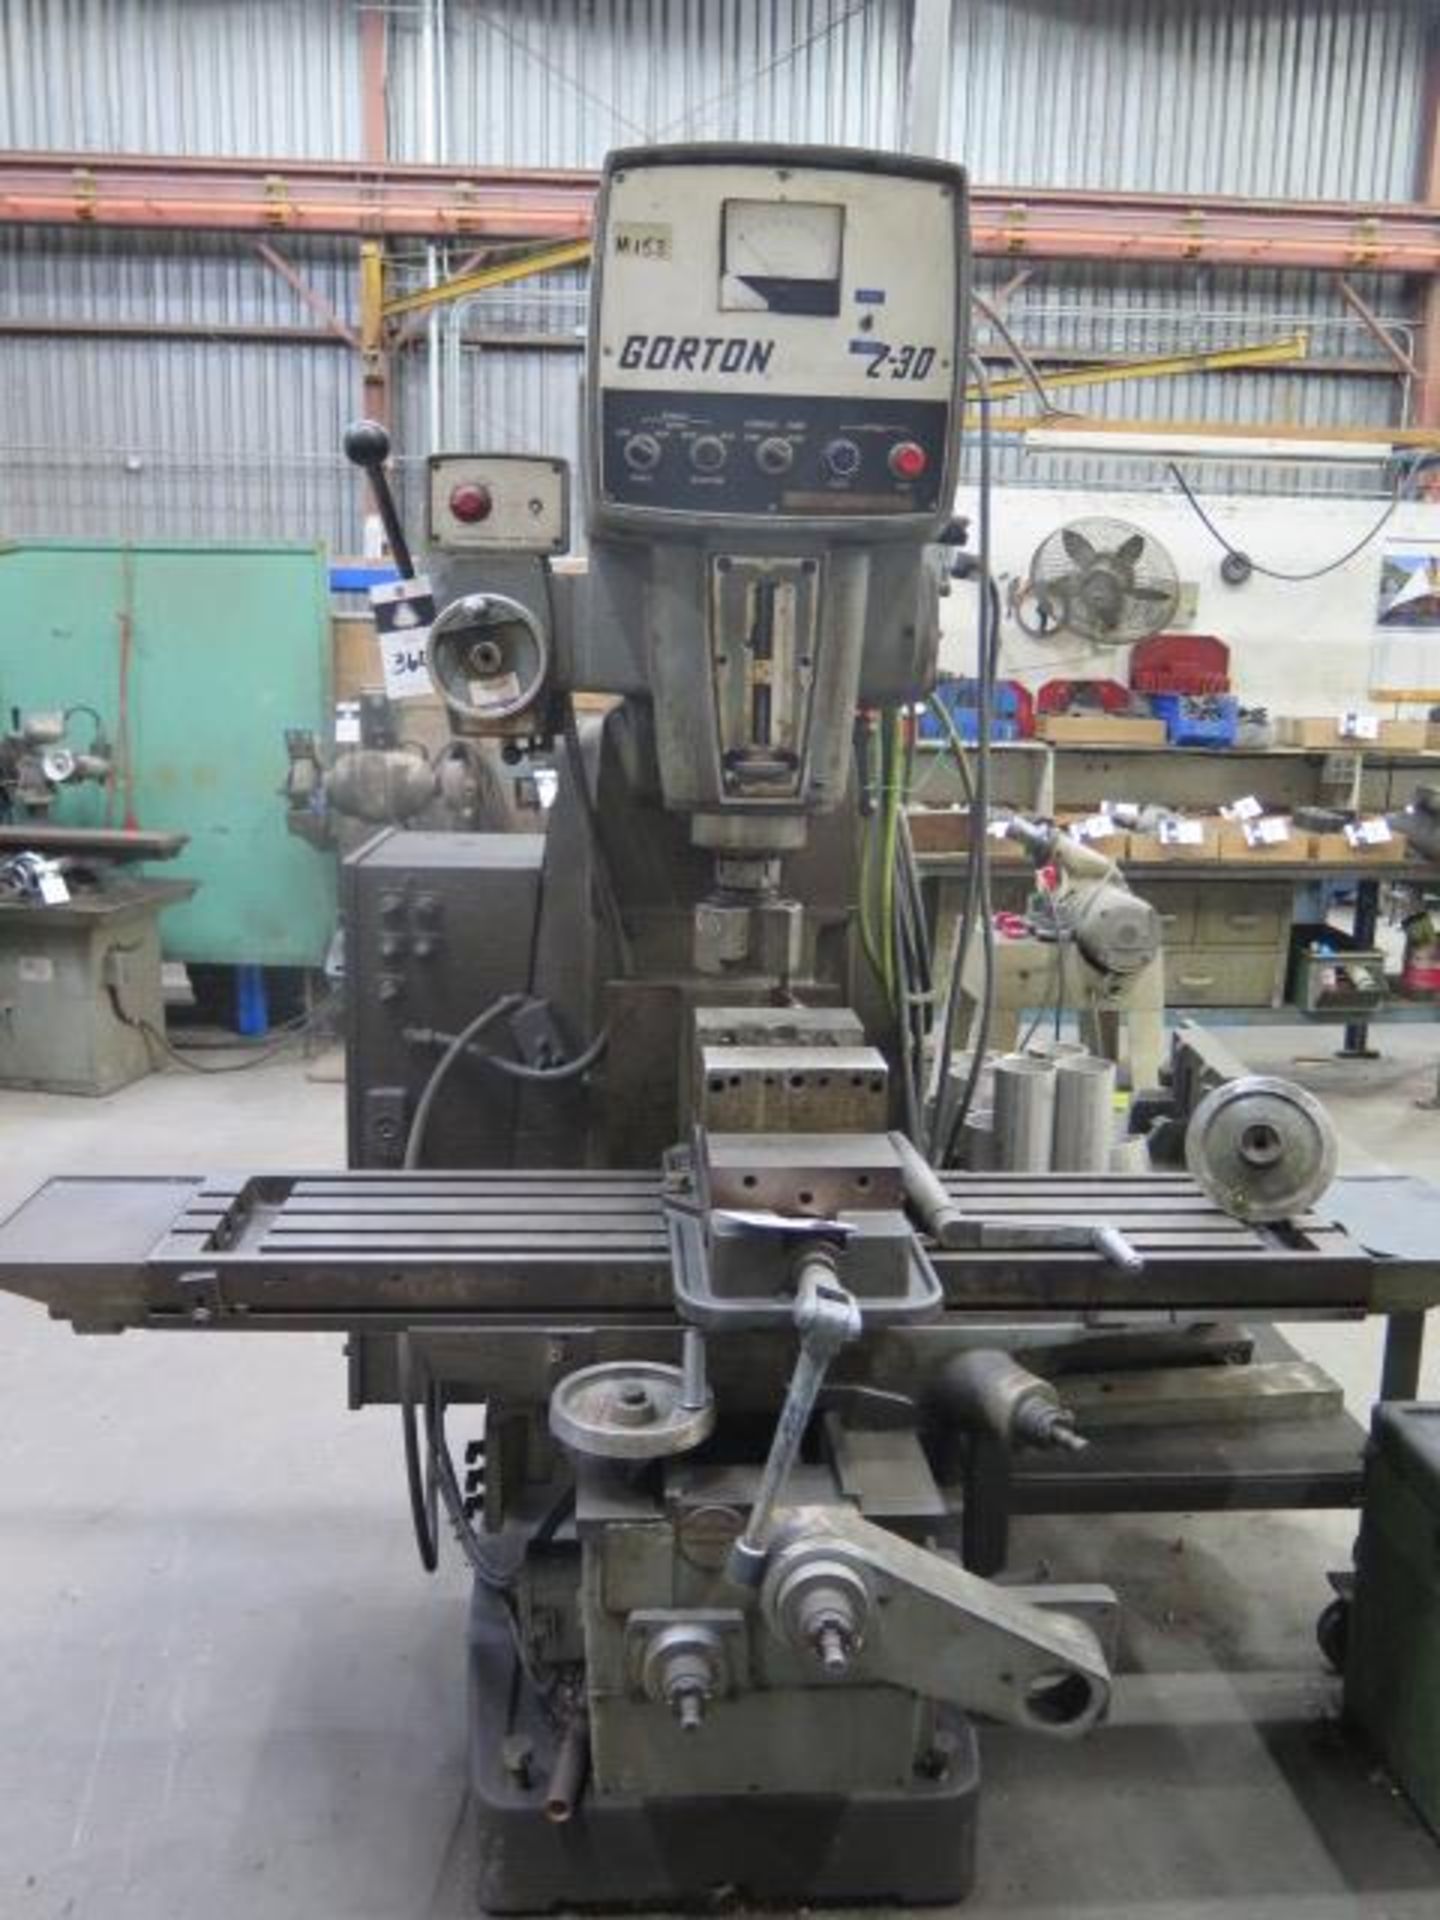 Gorton 2-30 Auto Trace Master Vertical Mill w/ Universal Kwik-Switch Taper Spindle, SOLD AS IS - Bild 2 aus 9